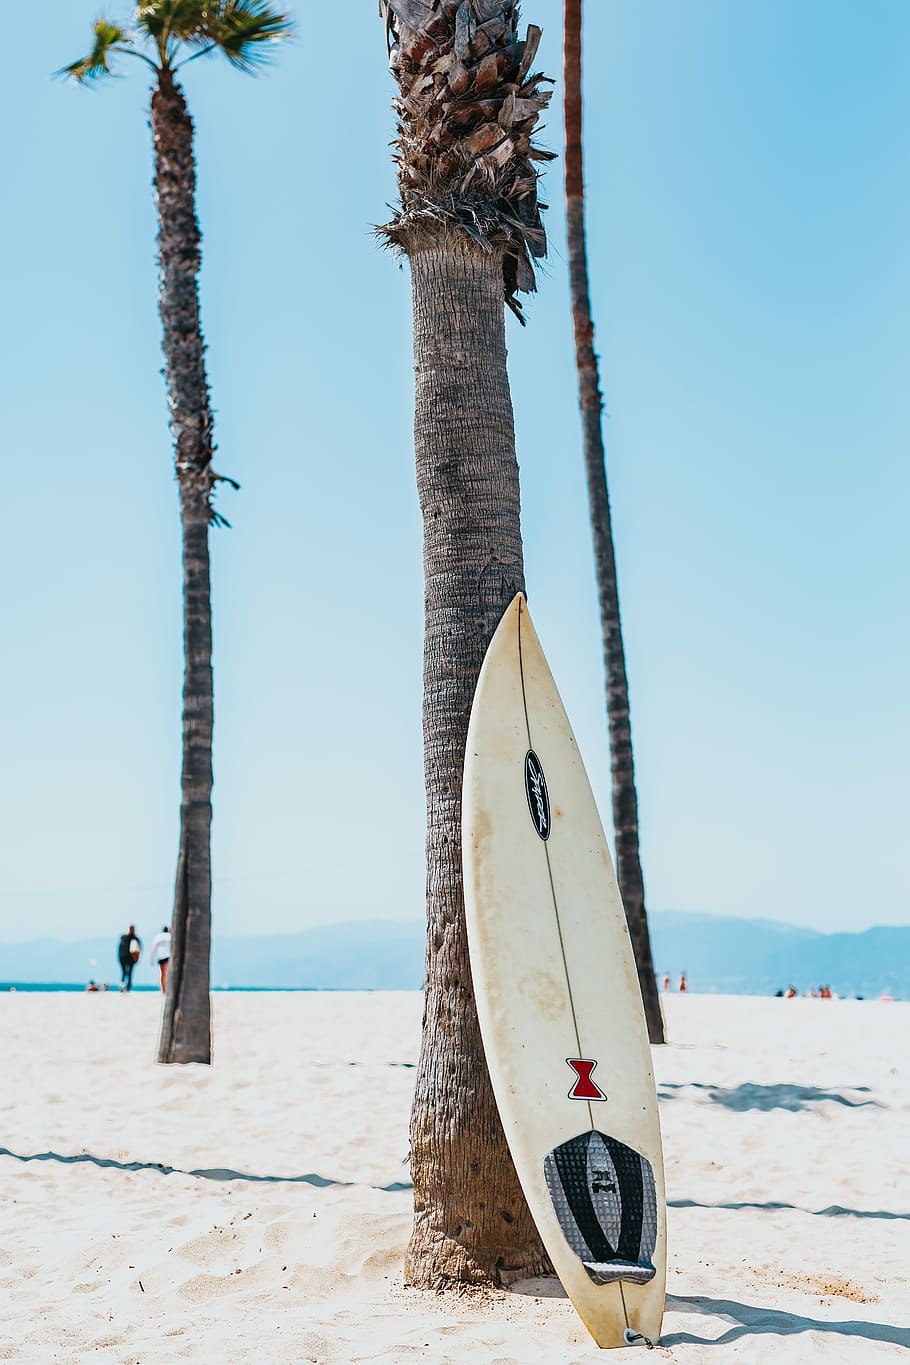 white and black surfboard leaning on gray Mexican palm tree, surfboard leaning on palm tree